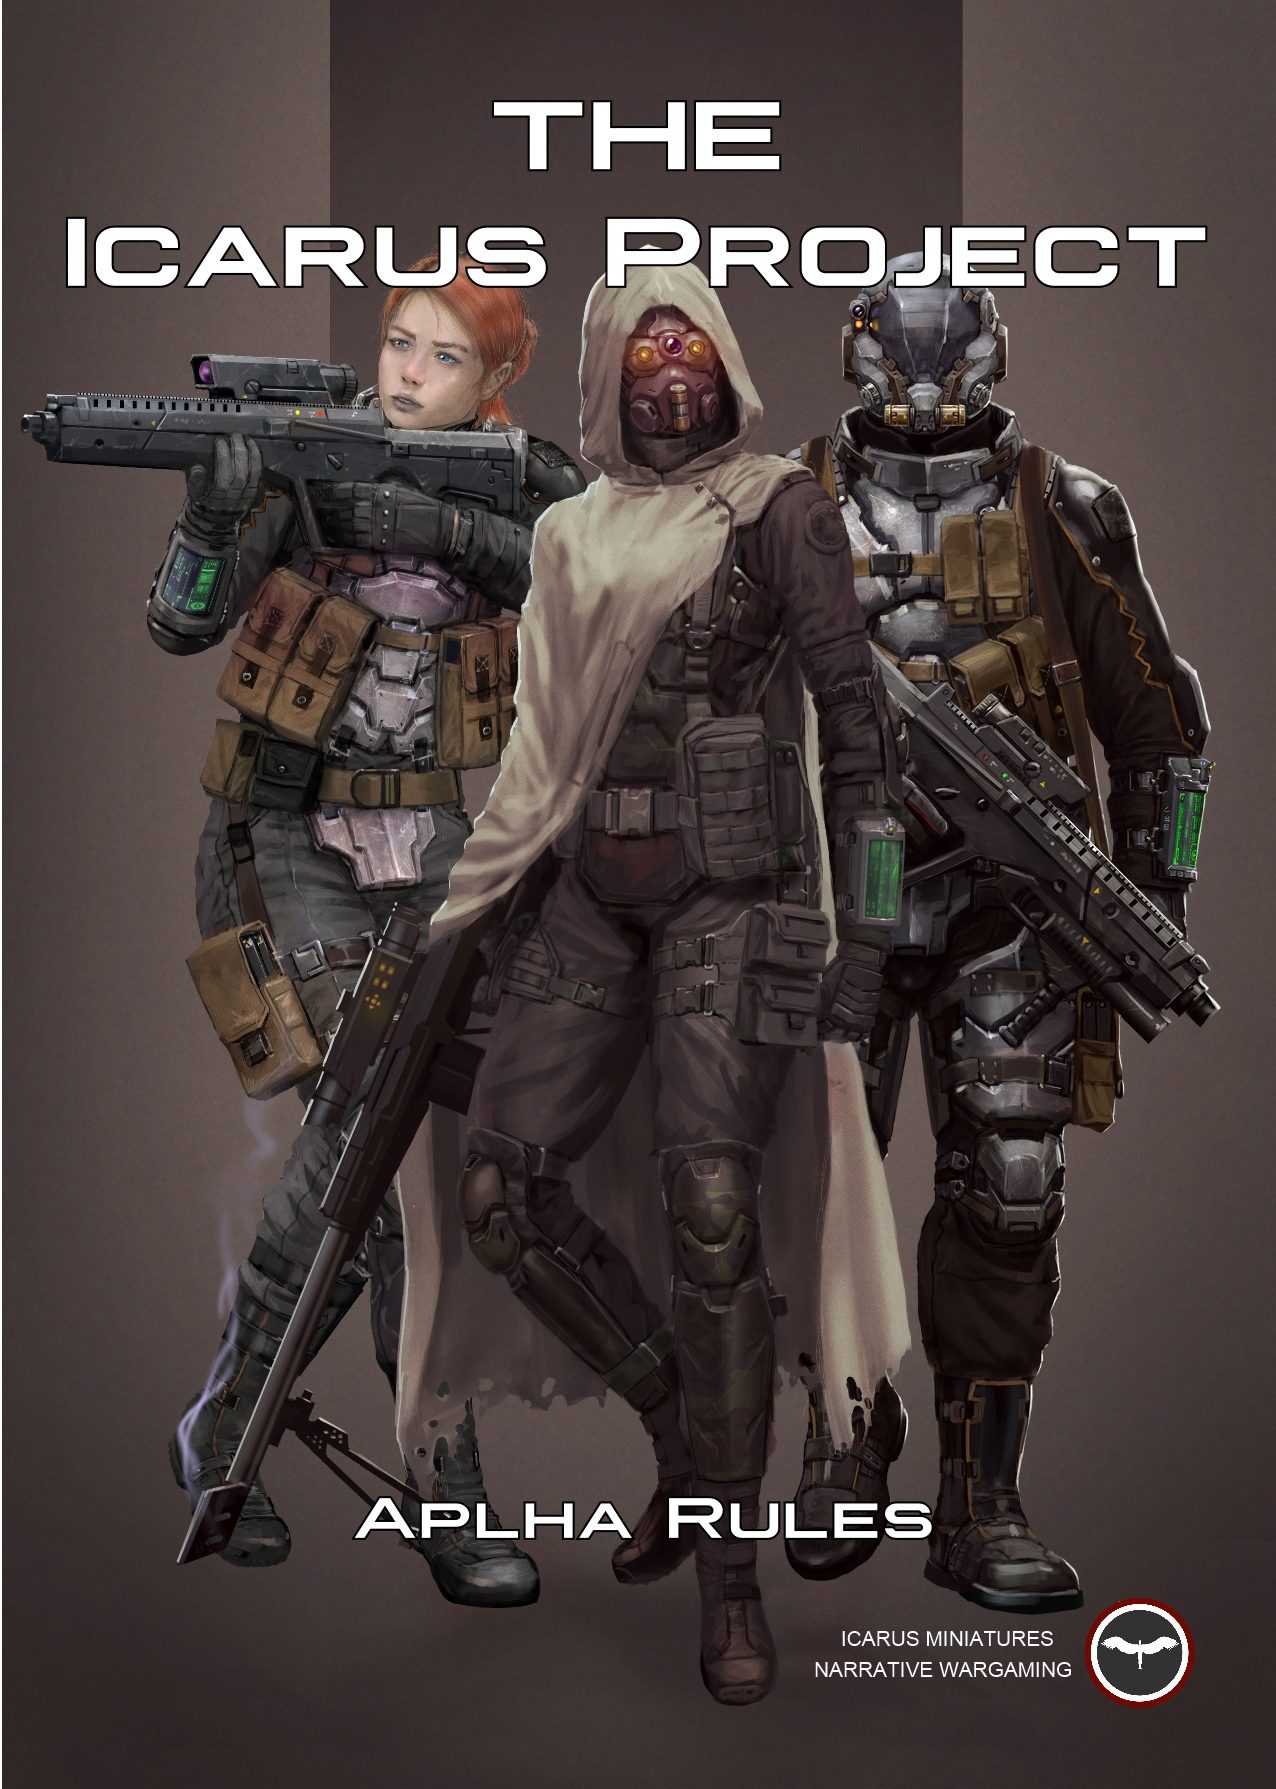 Cover image of the Icarus Project rules